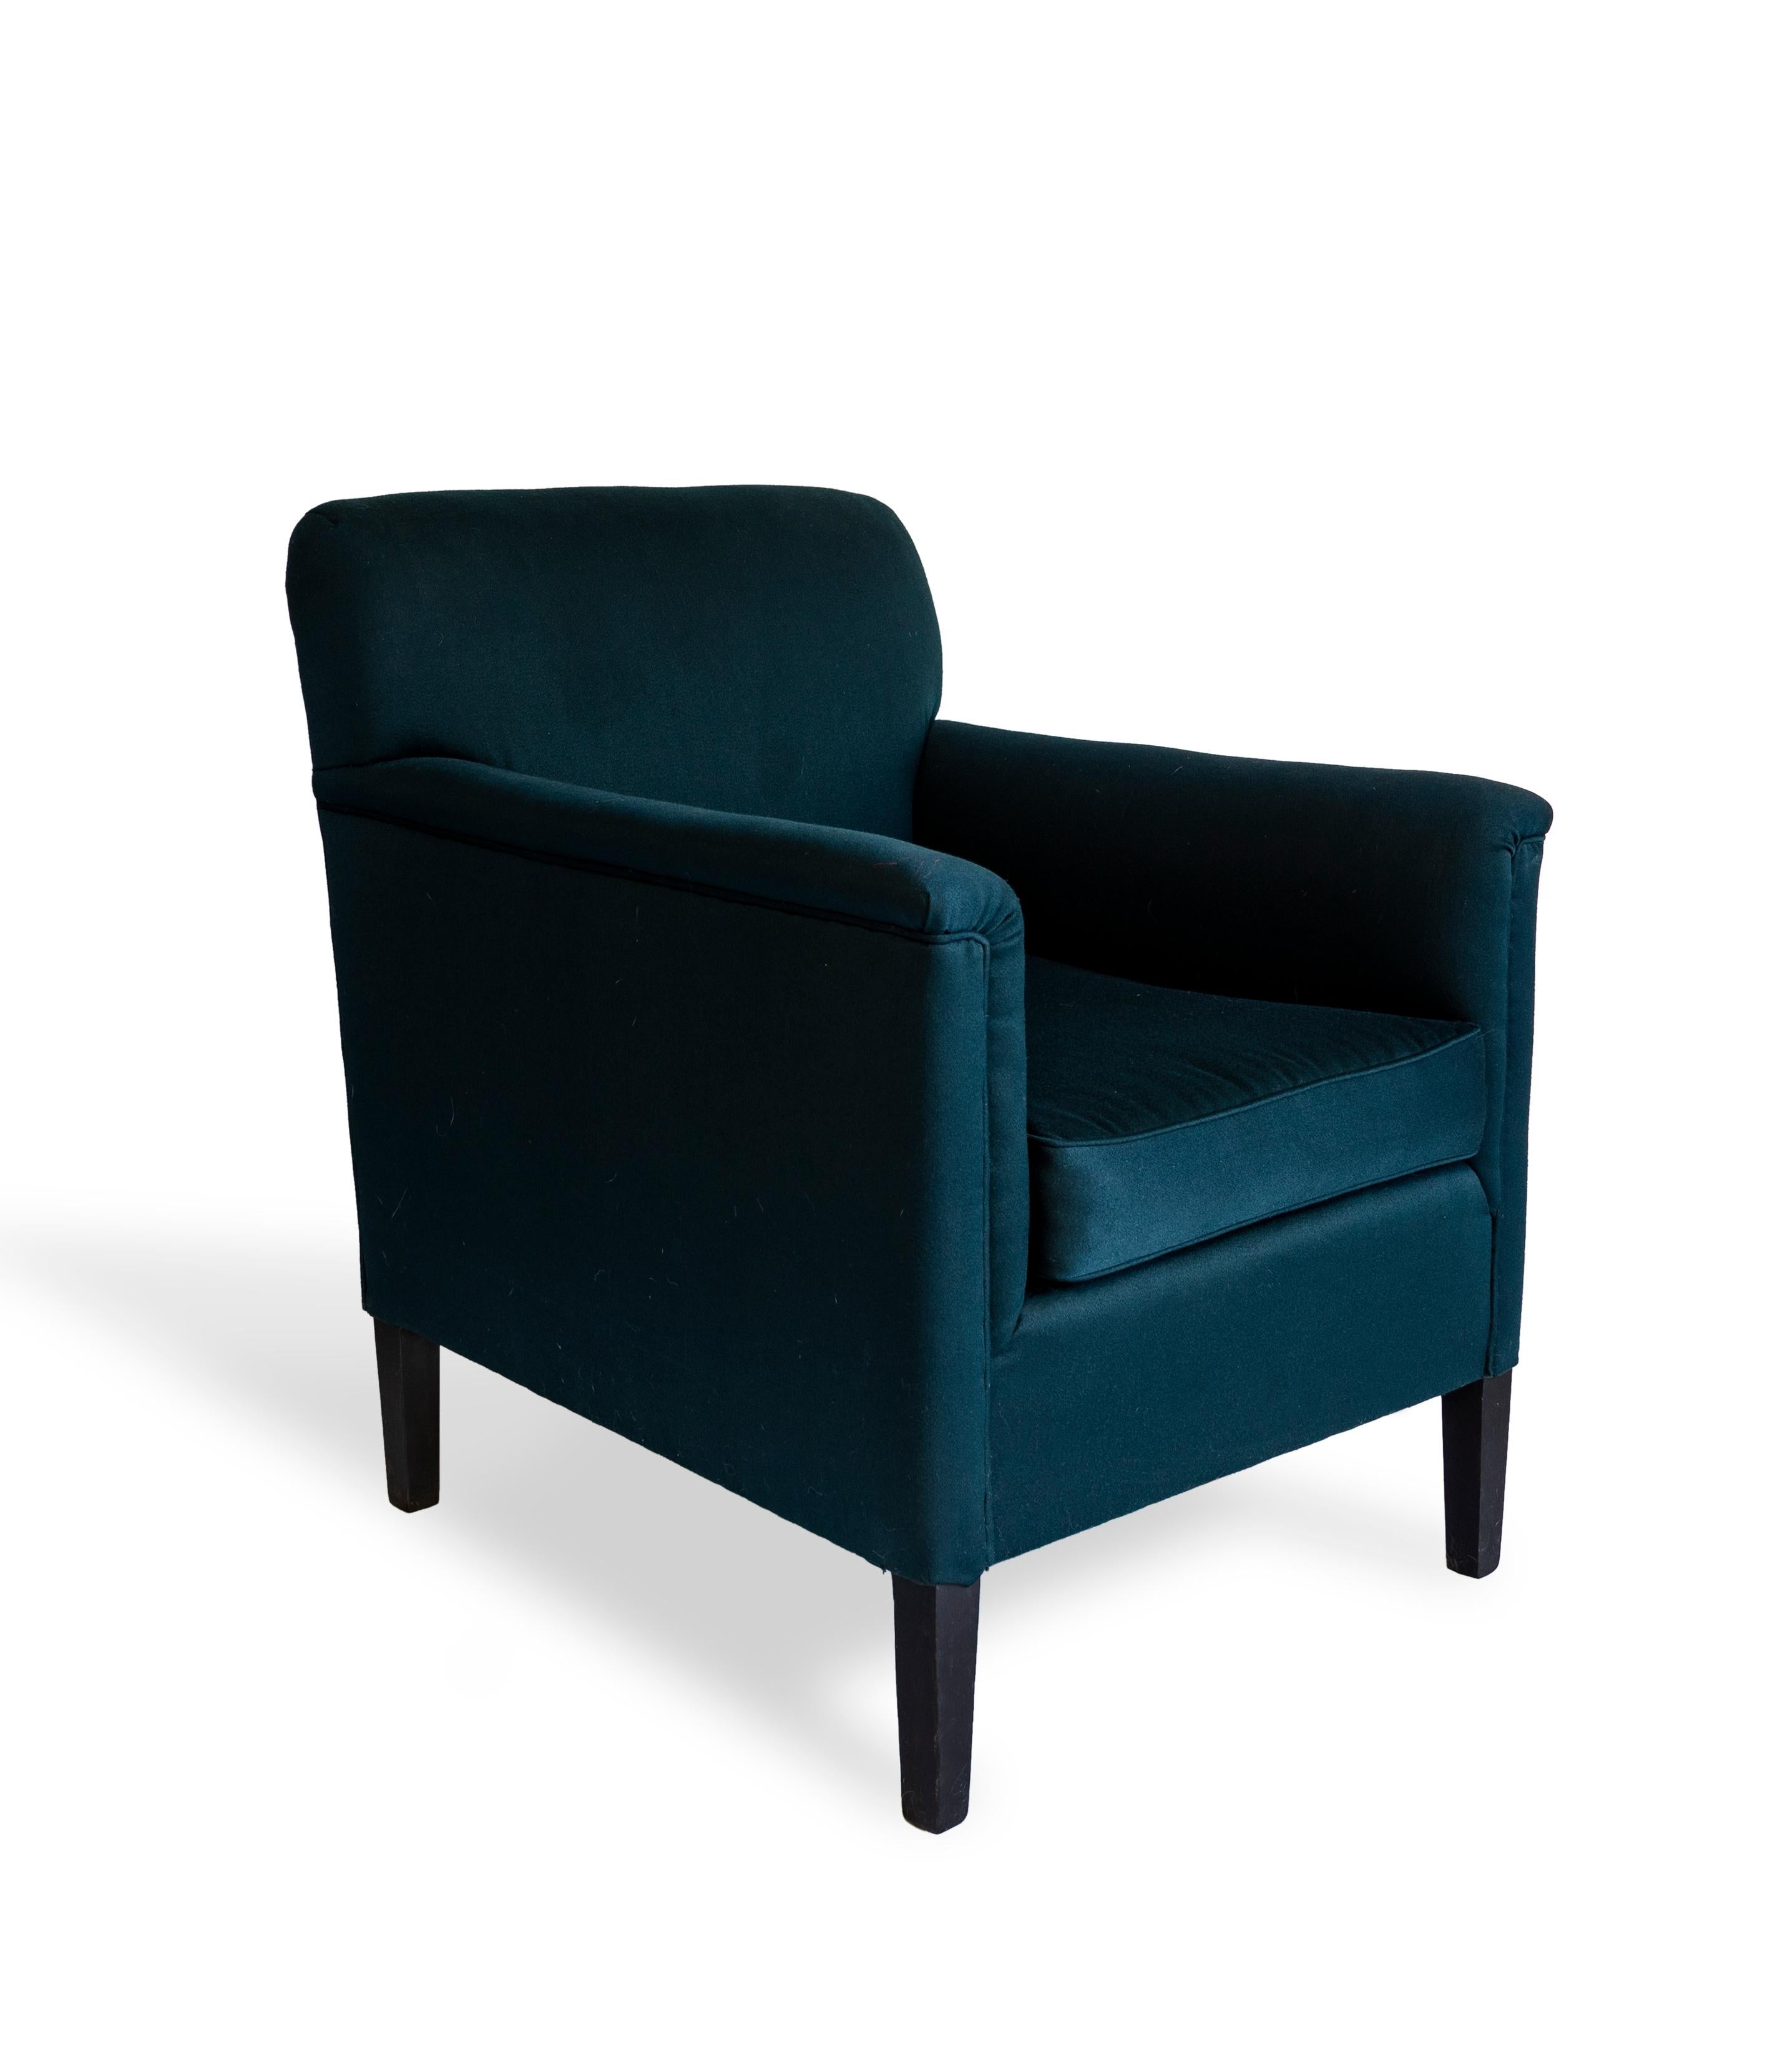 Herbert Upholstered Chair in Wool, Vica designed by Annabelle Selldorf 2